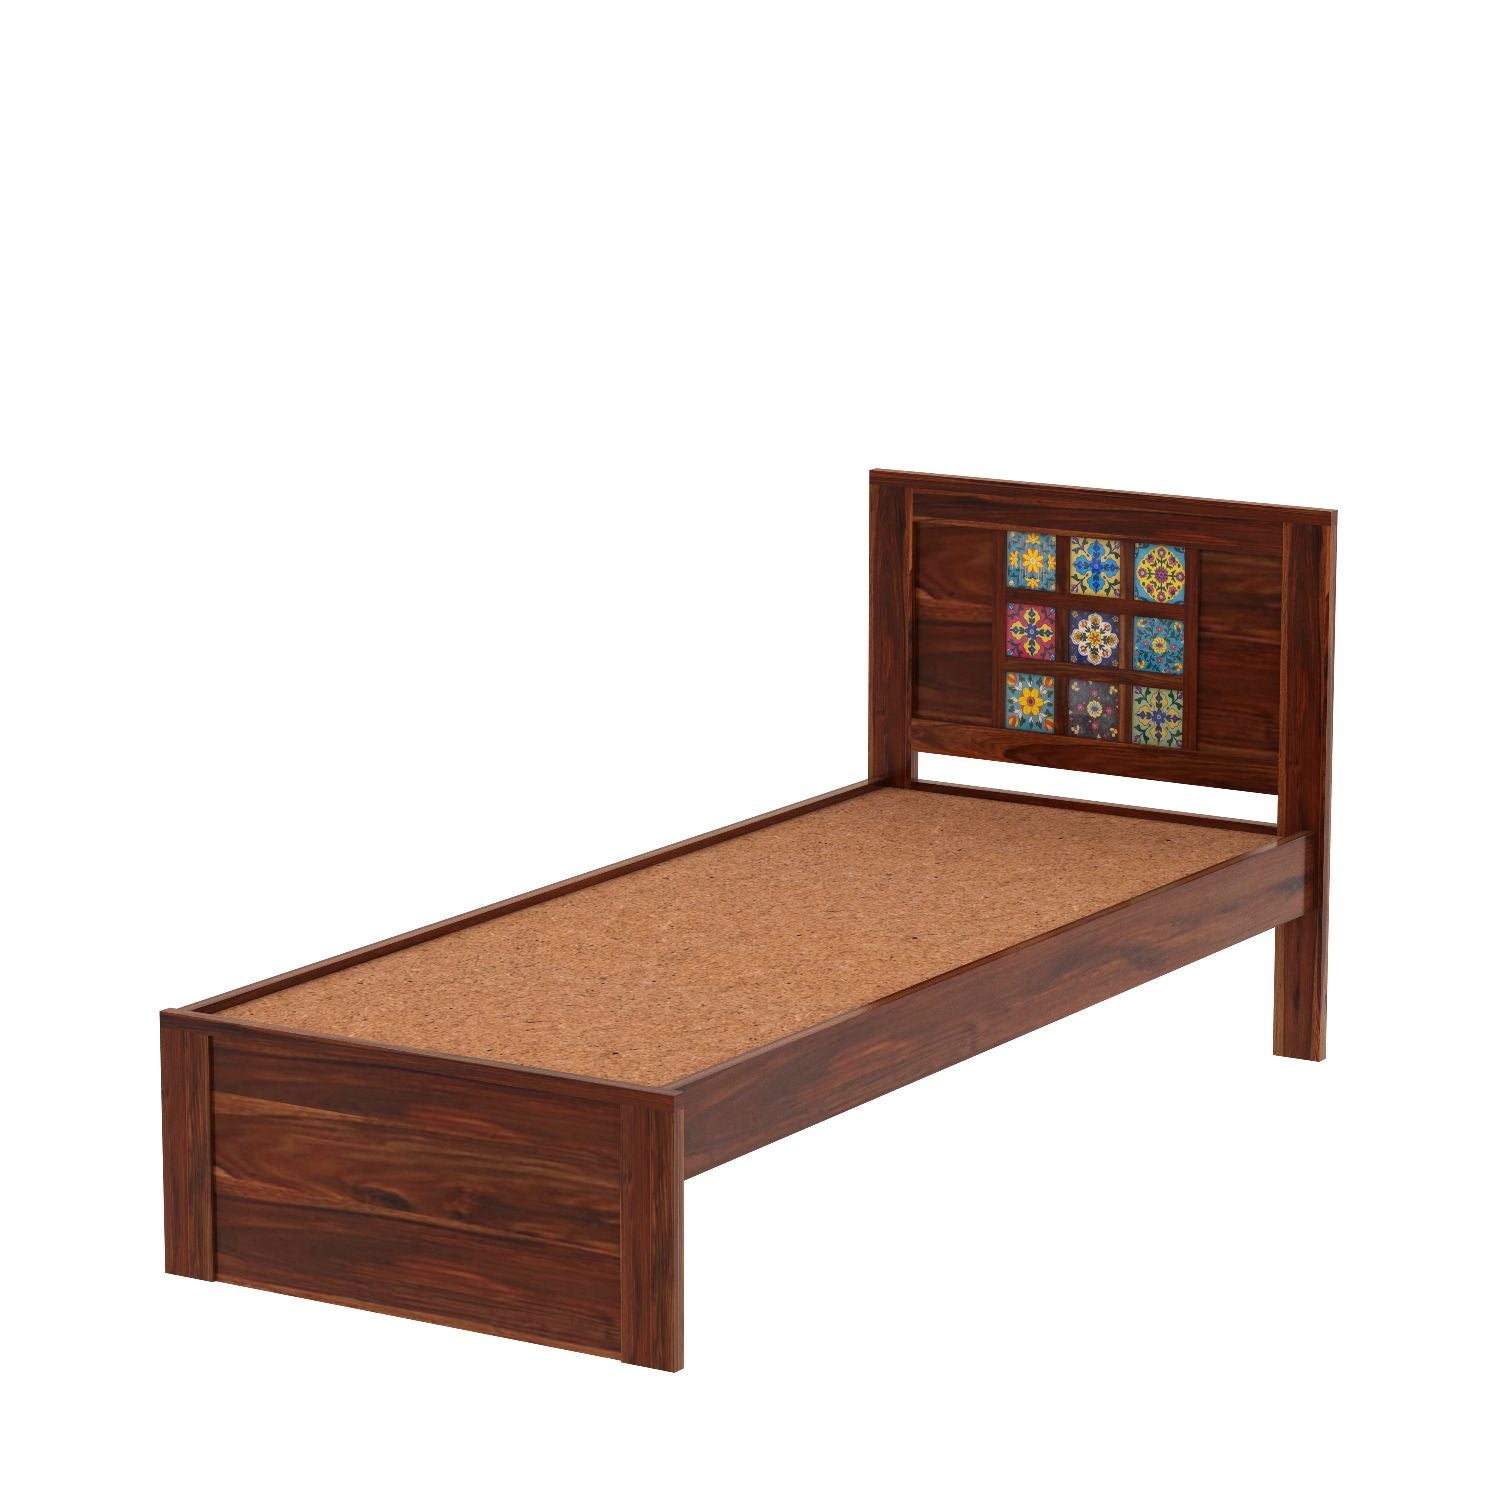 Dotwork Solid Sheesham Wood Single Bed Without Storage (Natural Finish)